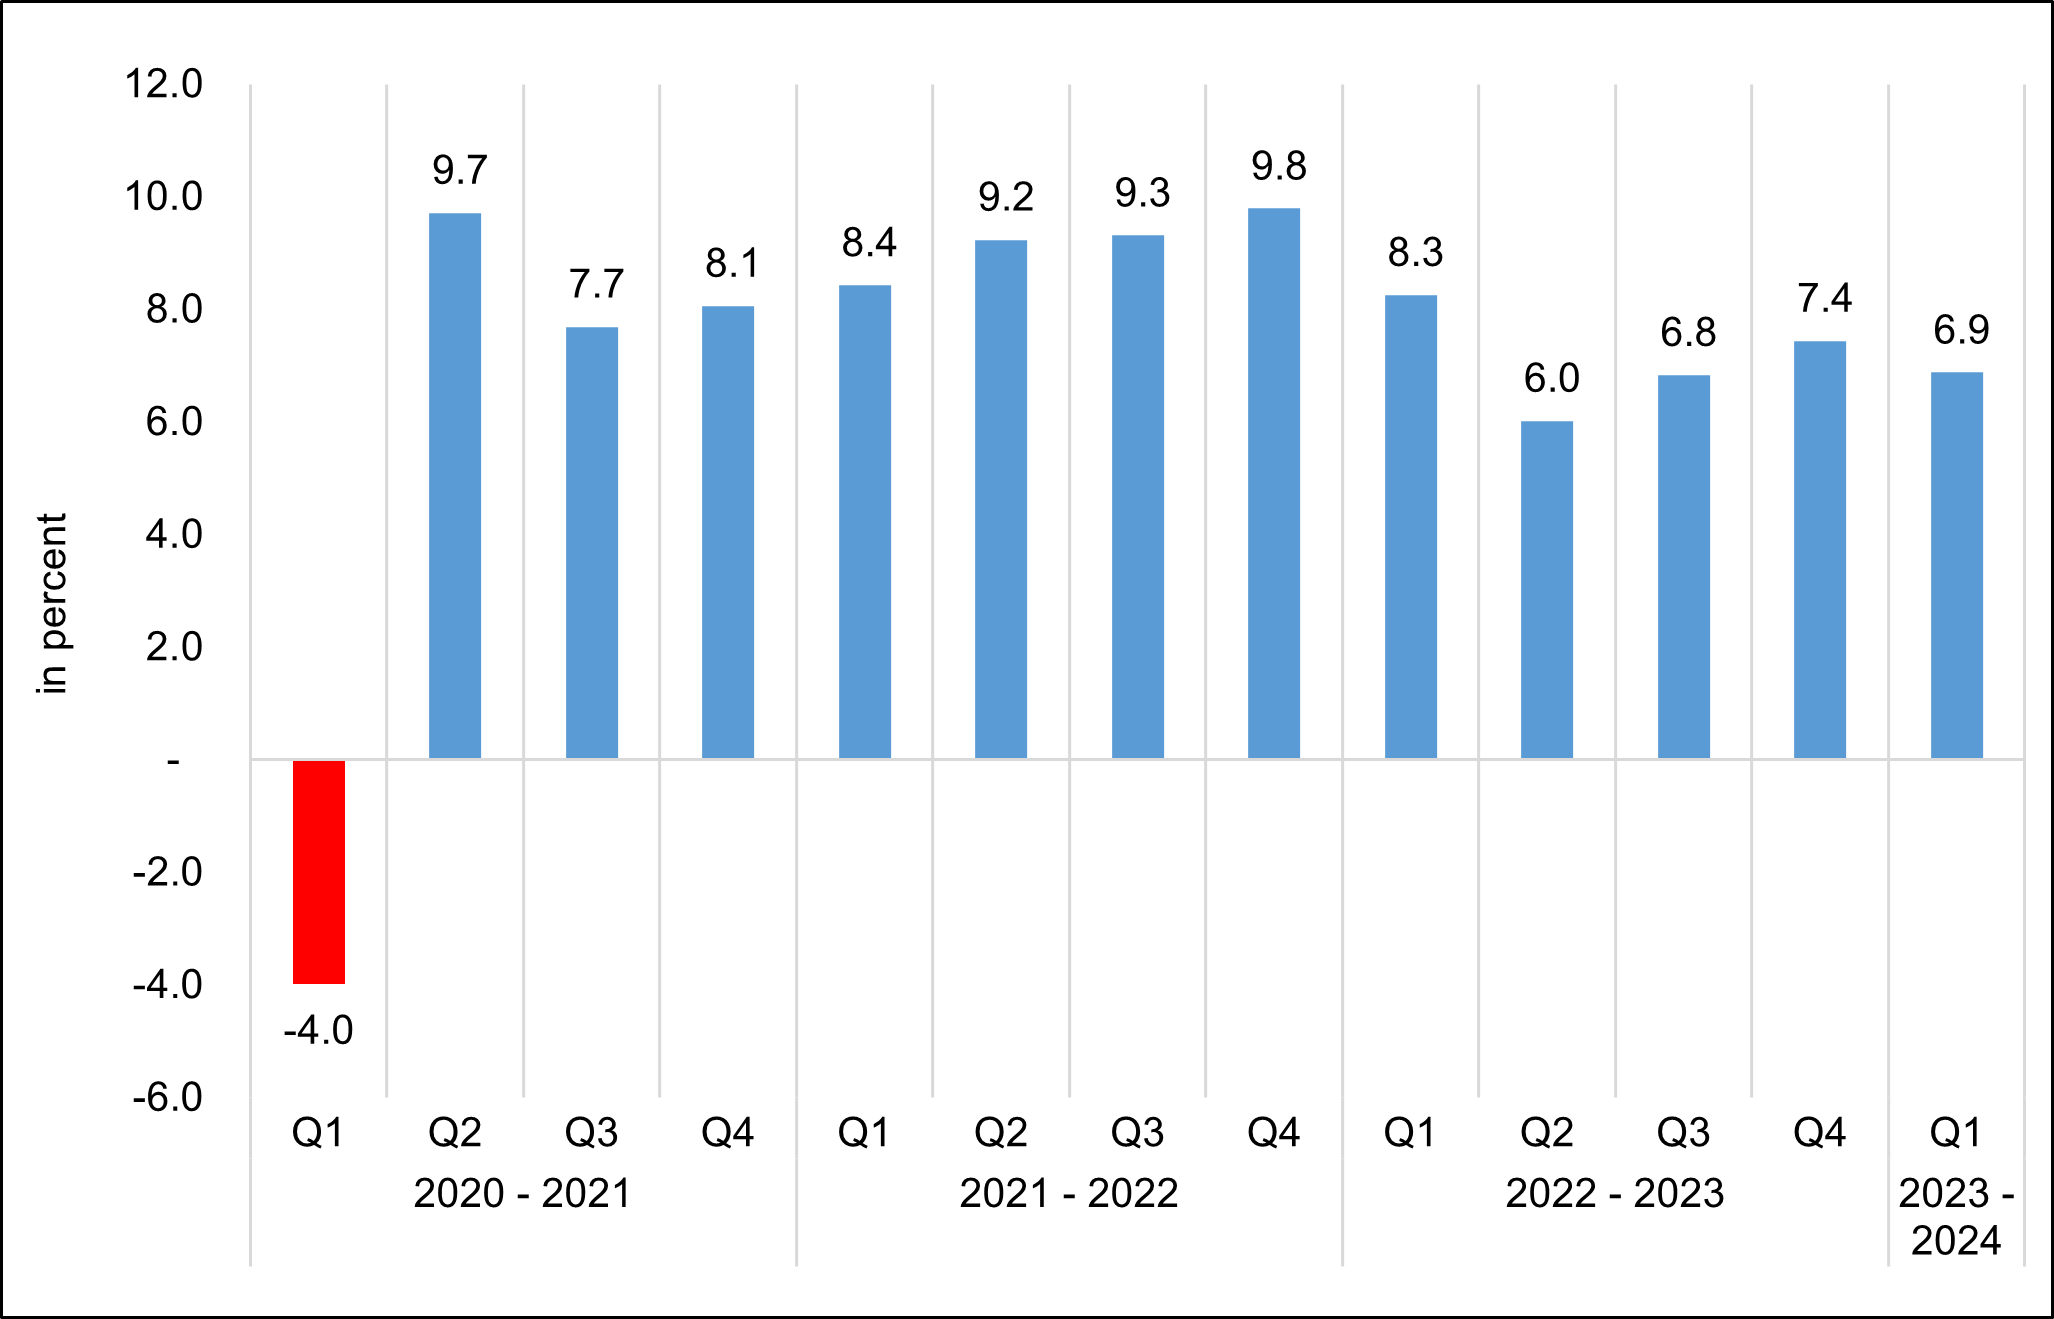 Figure 4. Services, Q1 2021 to Q1 2024 Growth Rates, At Constant 2018 Prices